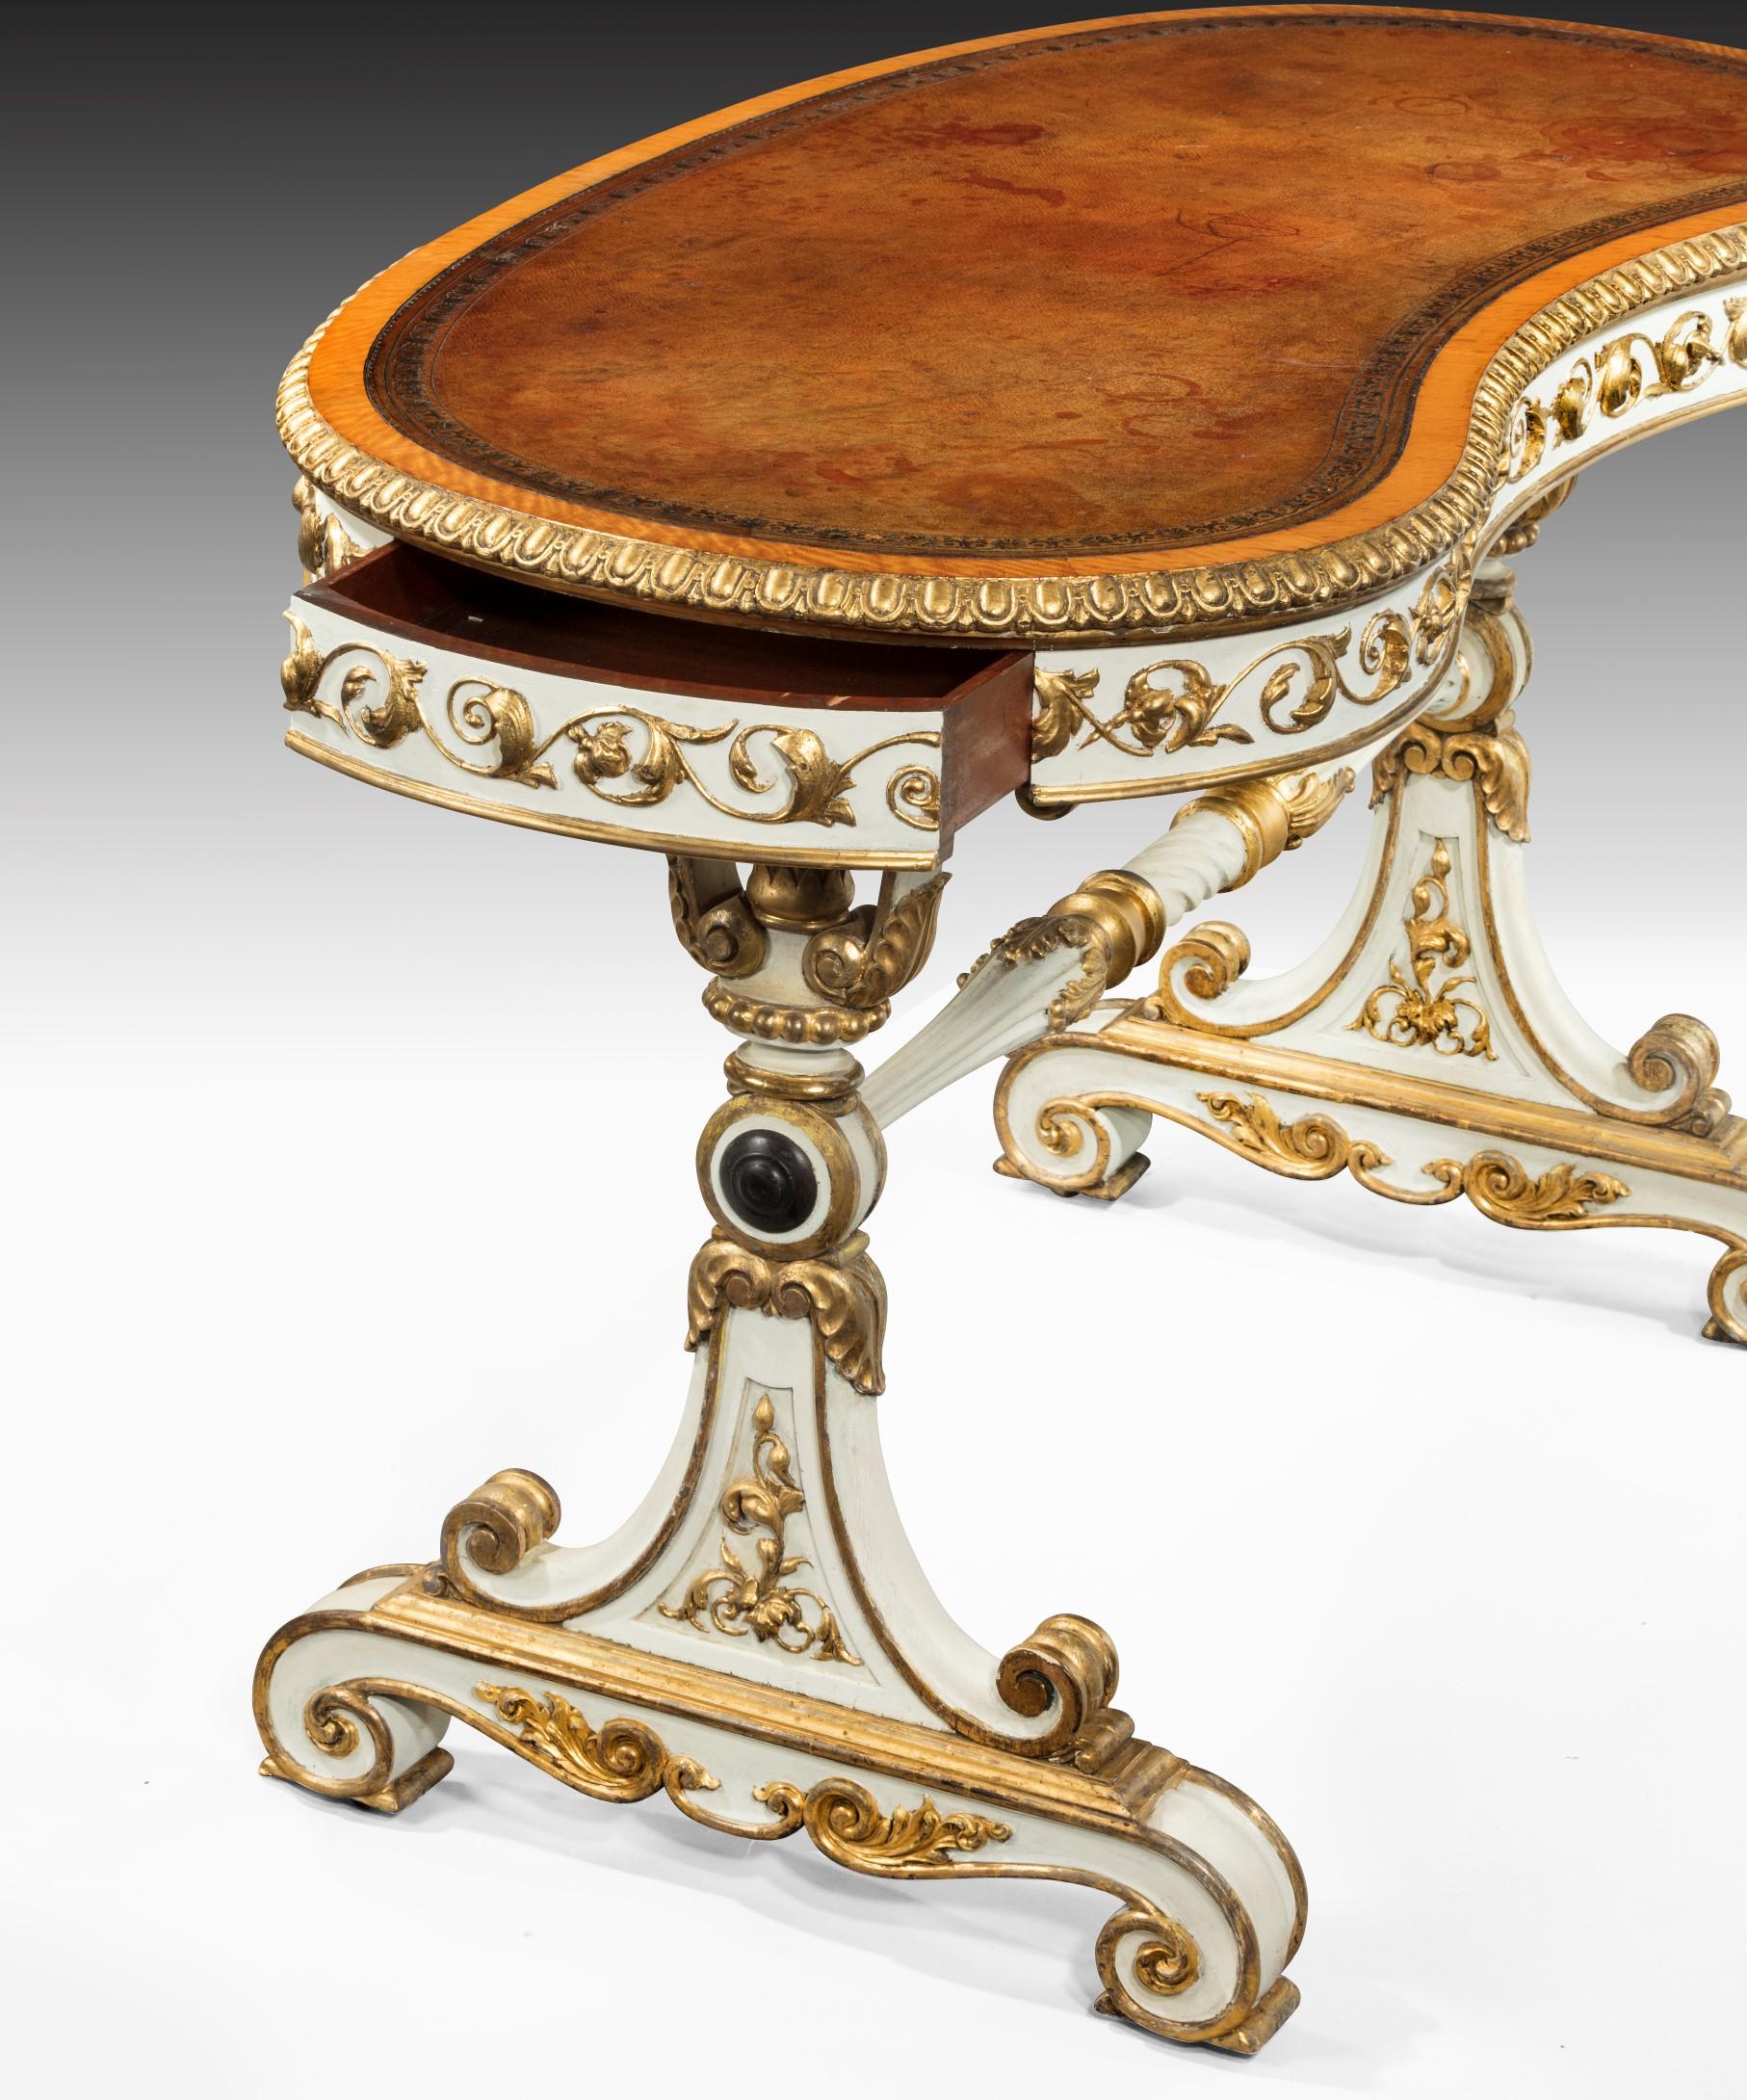 English William IV Kidney Shaped Writing Table with Carved Giltwood and White Painted For Sale